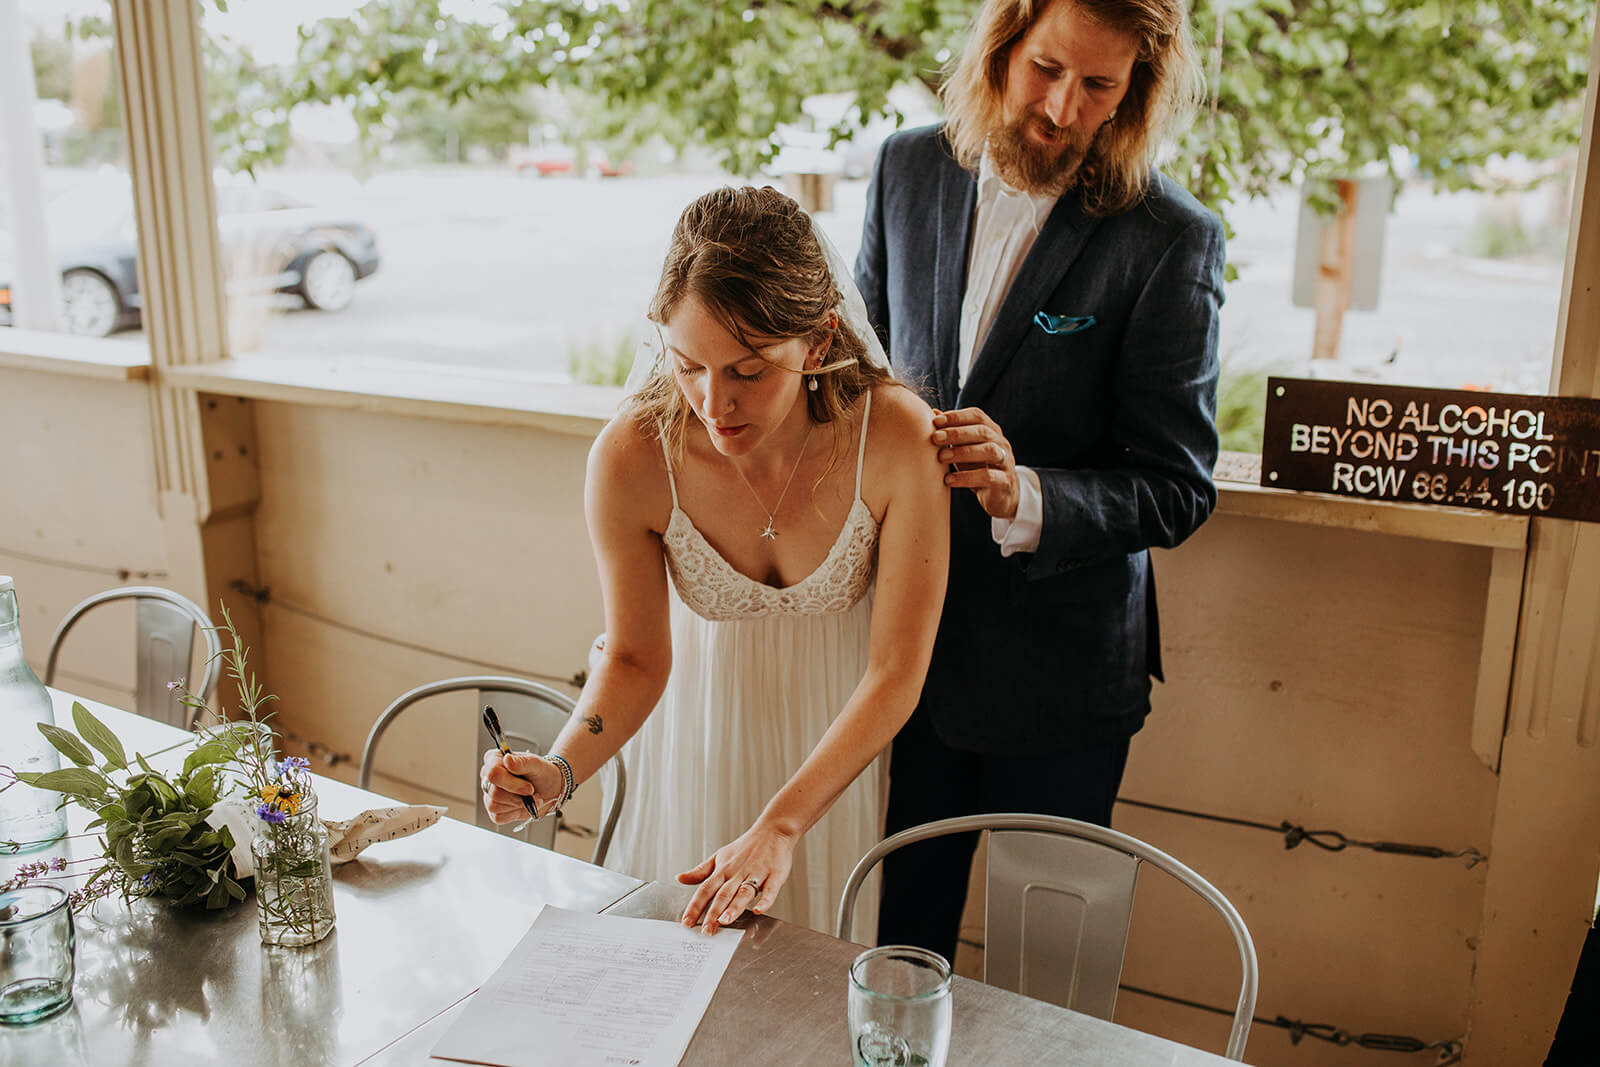 Bride and groom sign marriage license after casual wedding ceremony